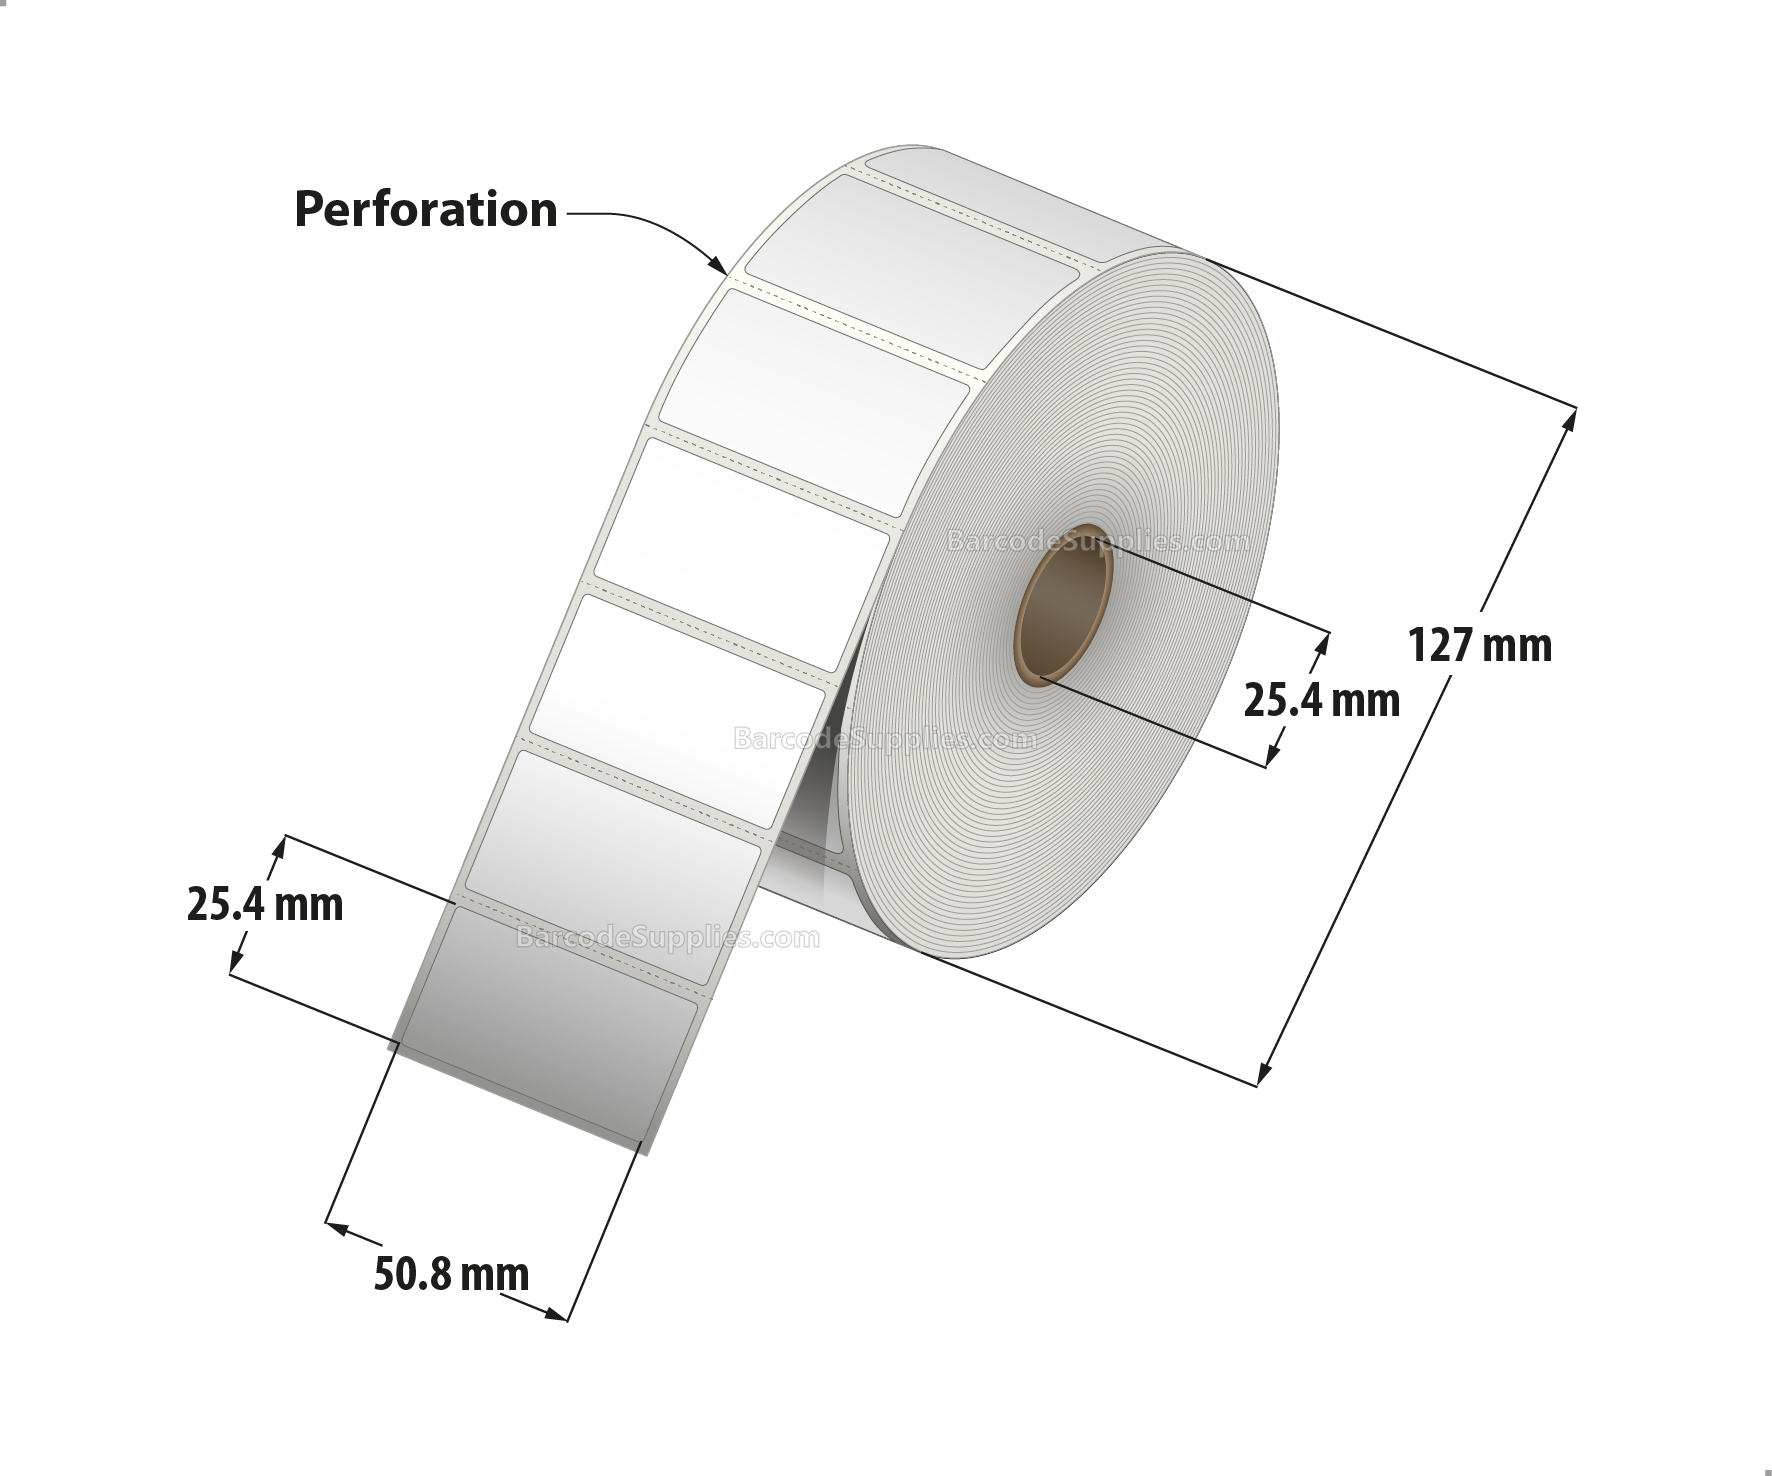 2 x 1 Thermal Transfer White Labels With Permanent Acrylic Adhesive - Perforated - 2300 Labels Per Roll - Carton Of 4 Rolls - 9200 Labels Total - MPN: TH21-15PTT